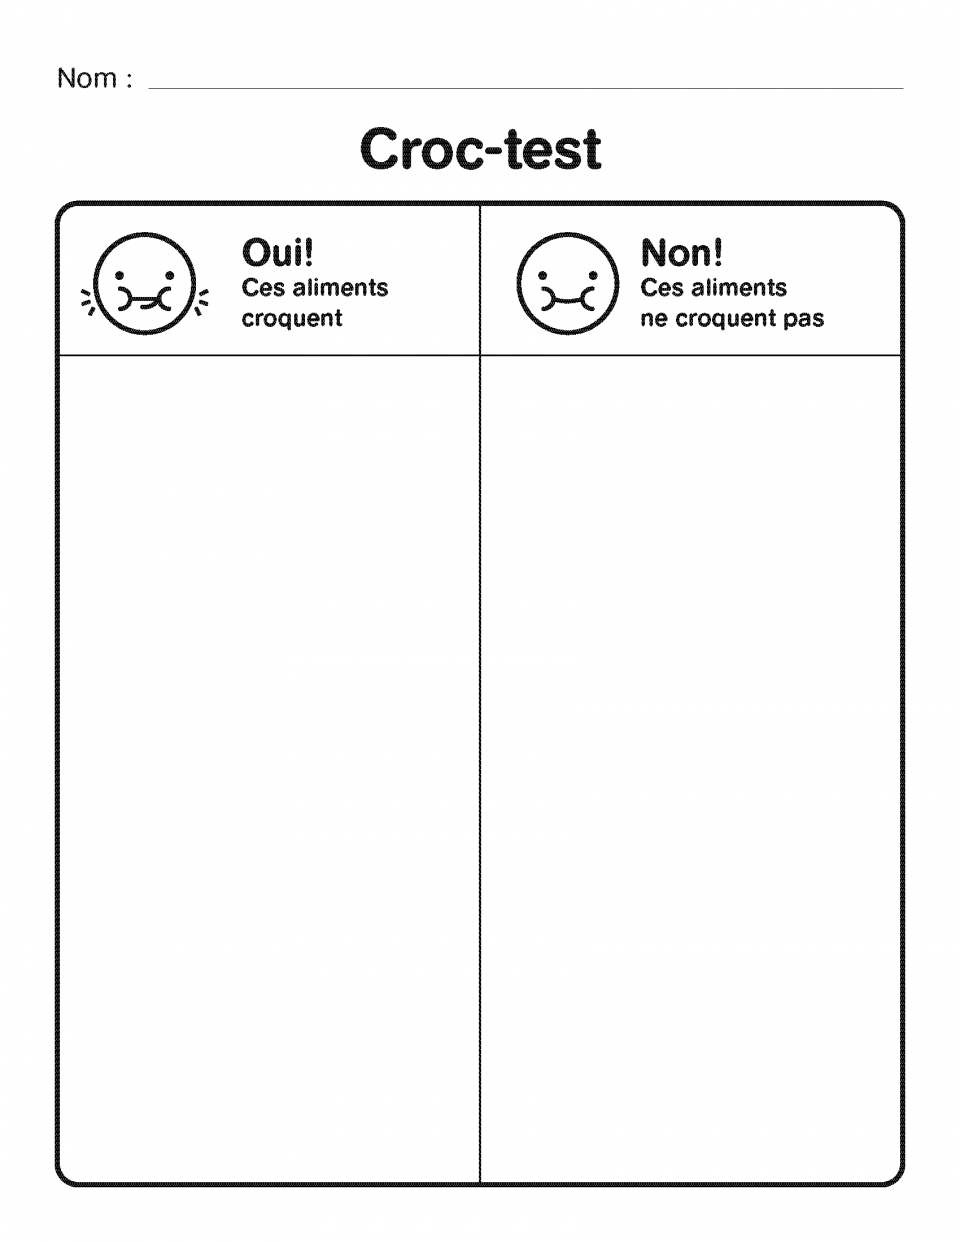 Image of a worksheet. One side for foods that crunch and one side for foods that do not crunch